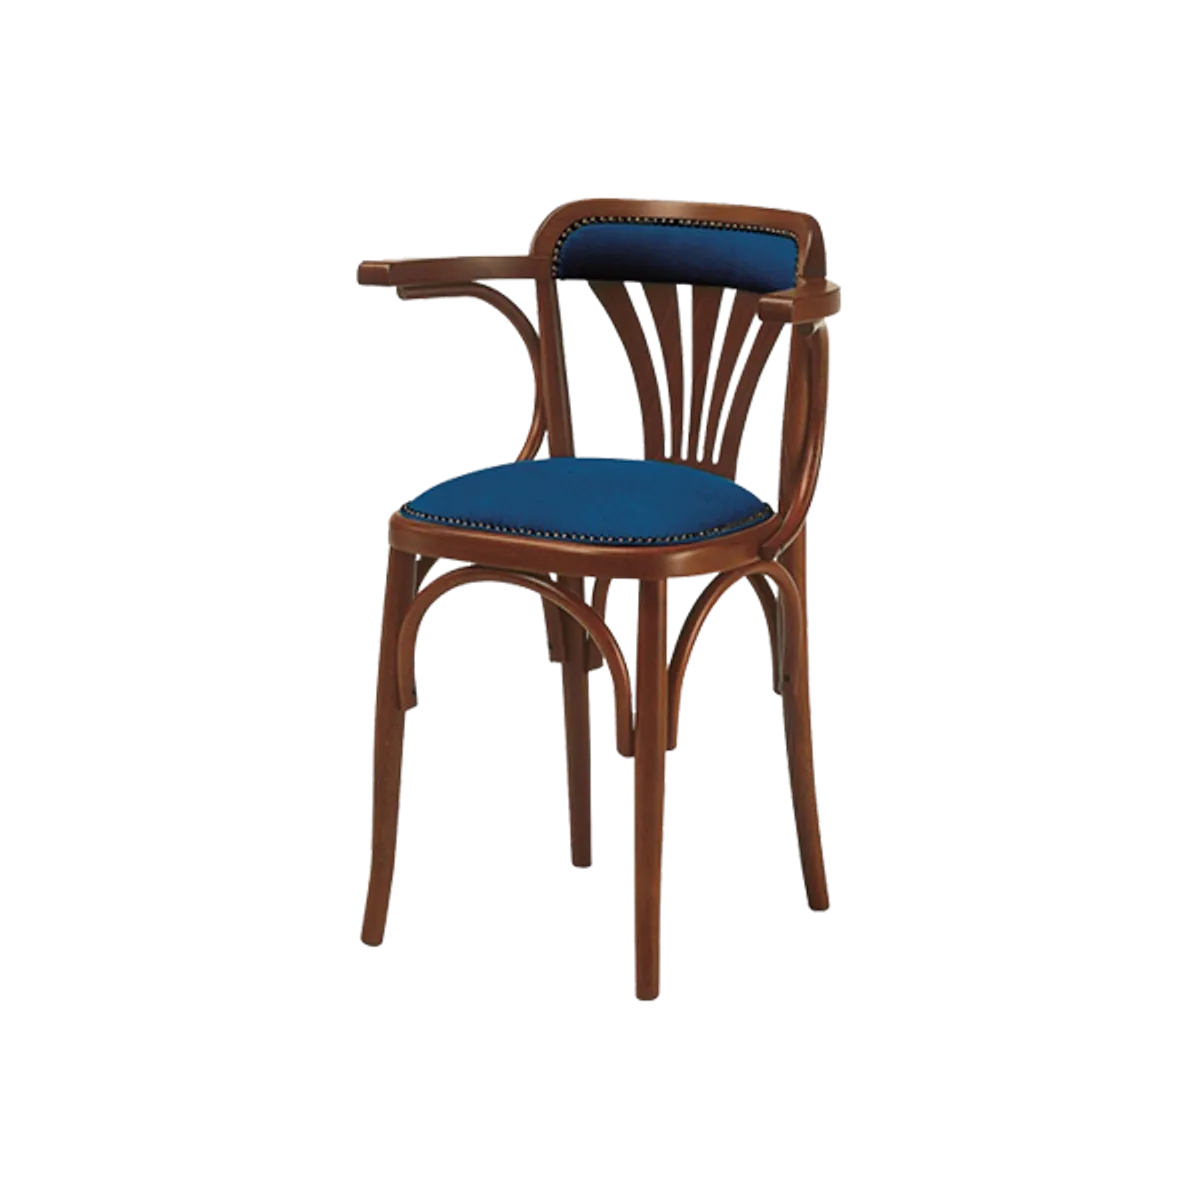 Web Sunrise Armchair Wooden Chair For Cafes And Restaurants